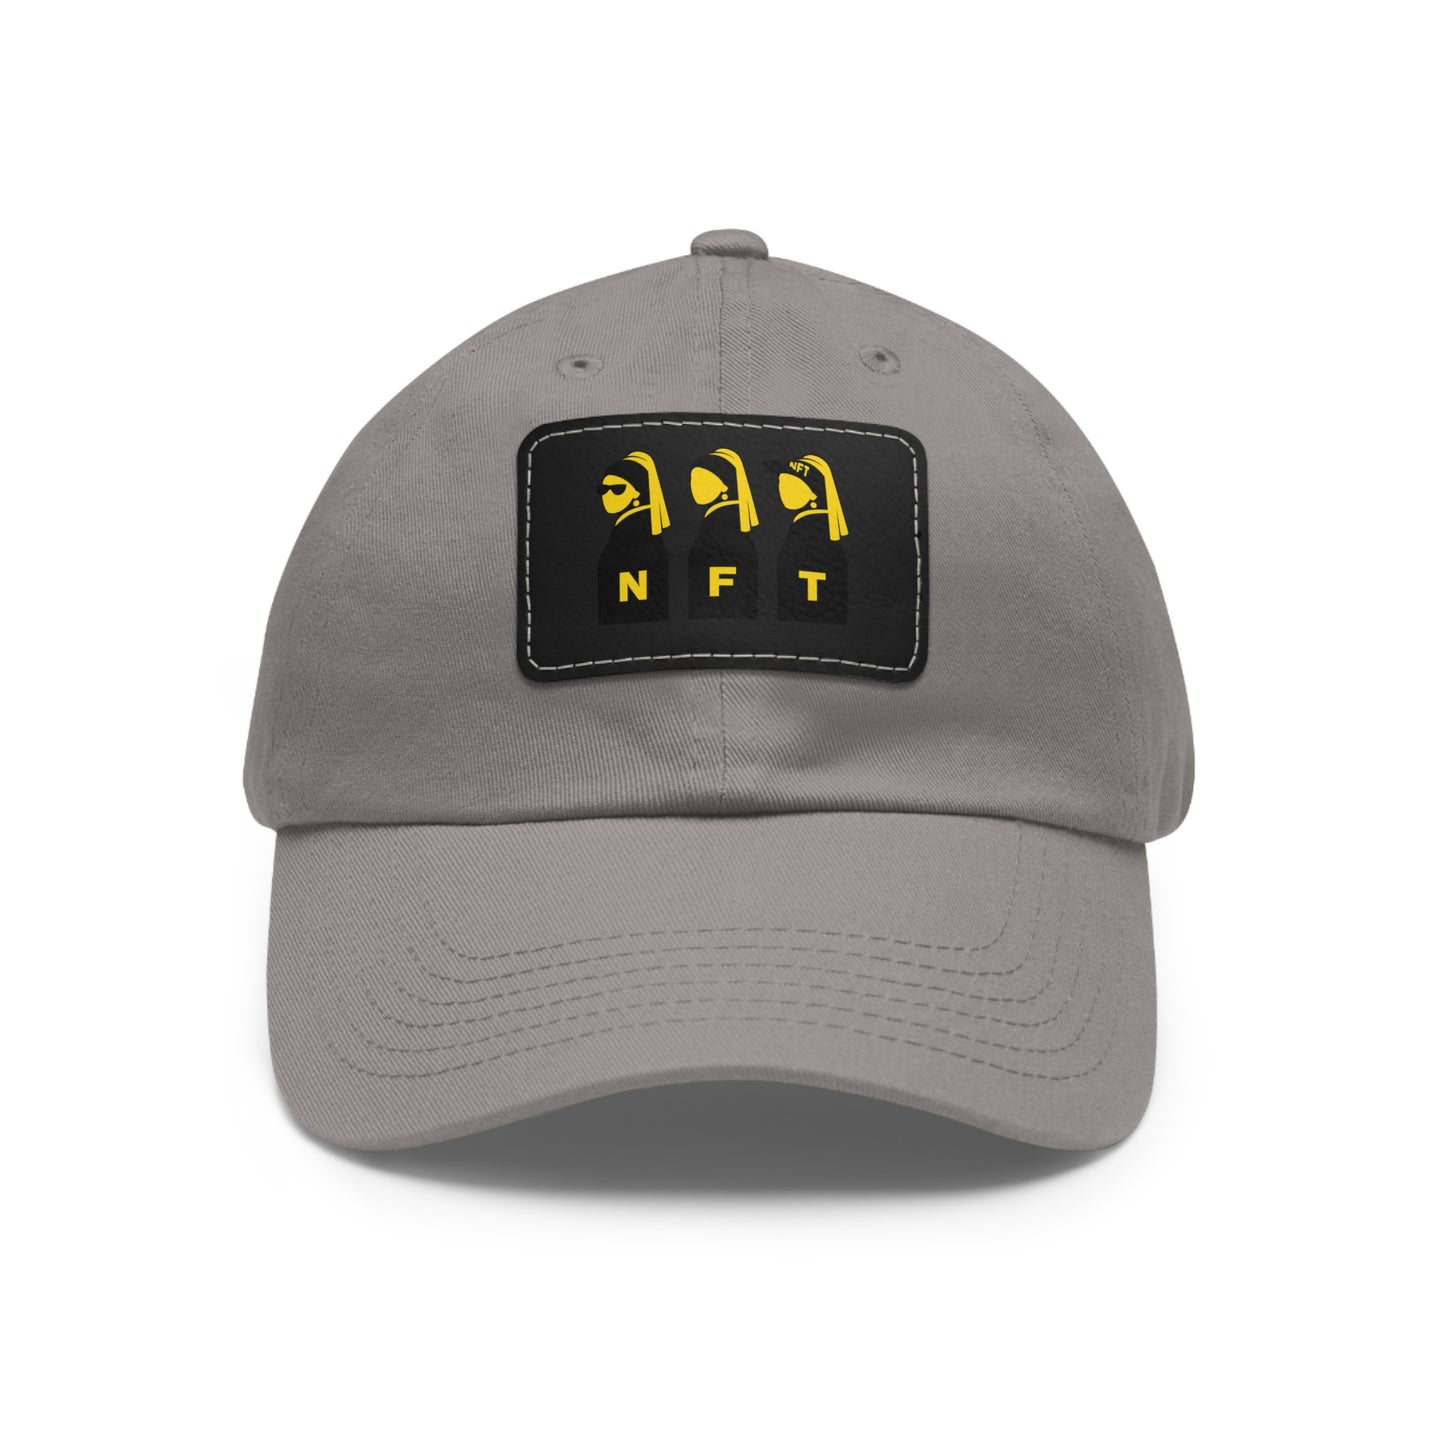 NFT Hat with Leather Patch